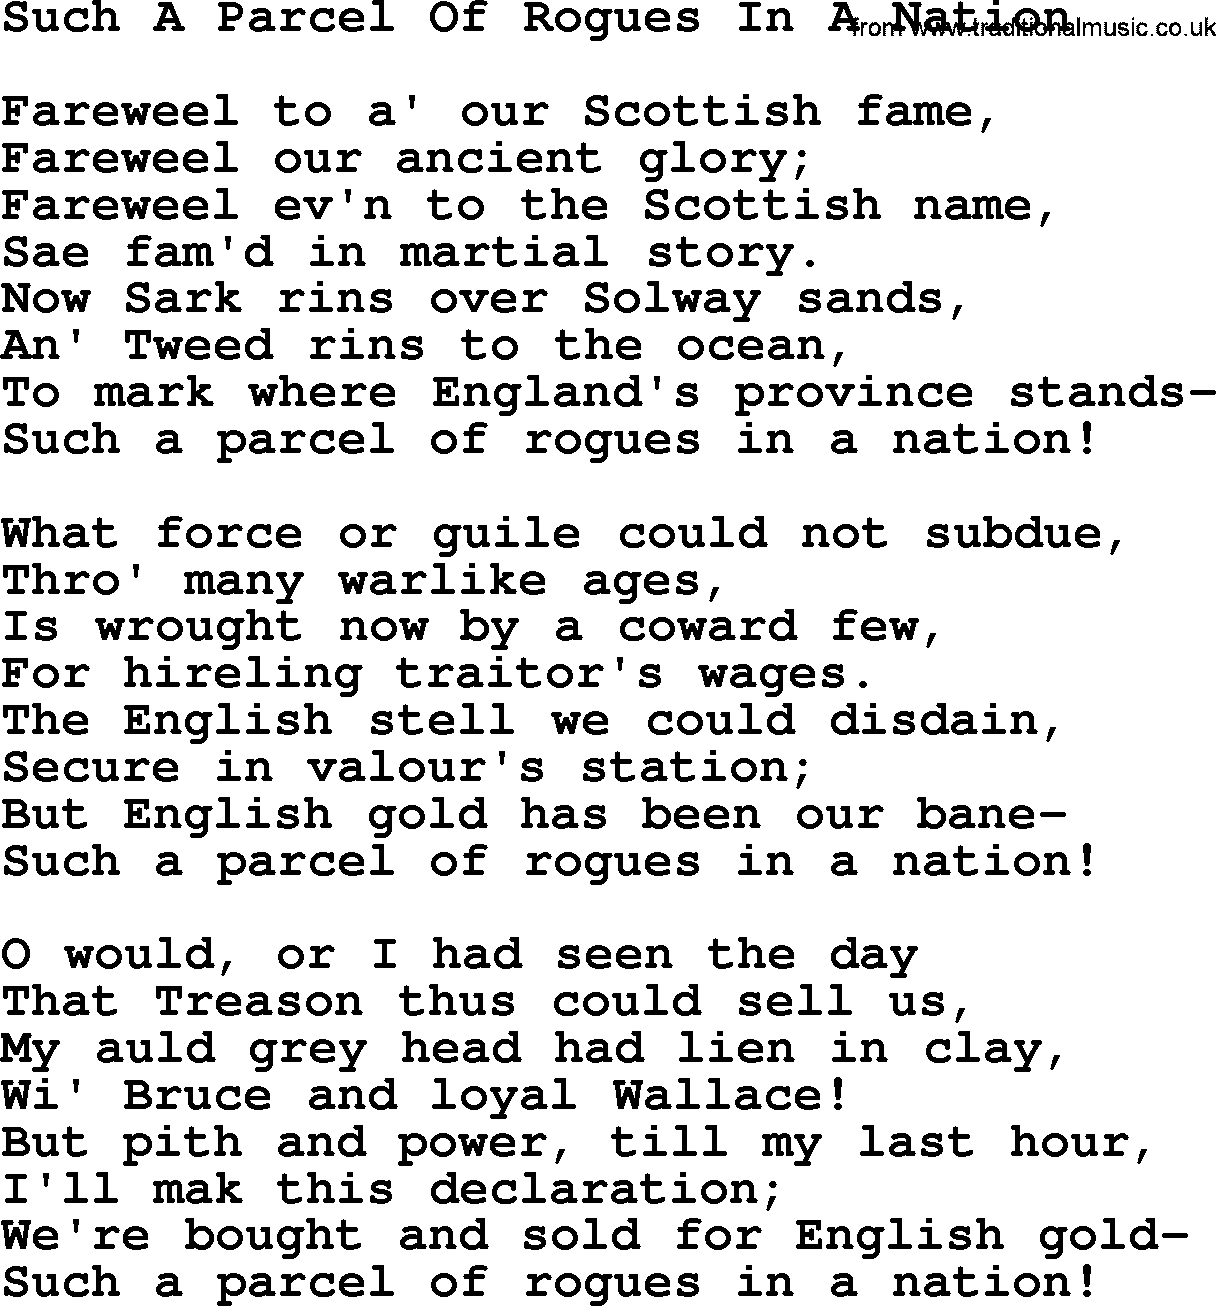 Robert Burns Songs & Lyrics: Such A Parcel Of Rogues In A Nation